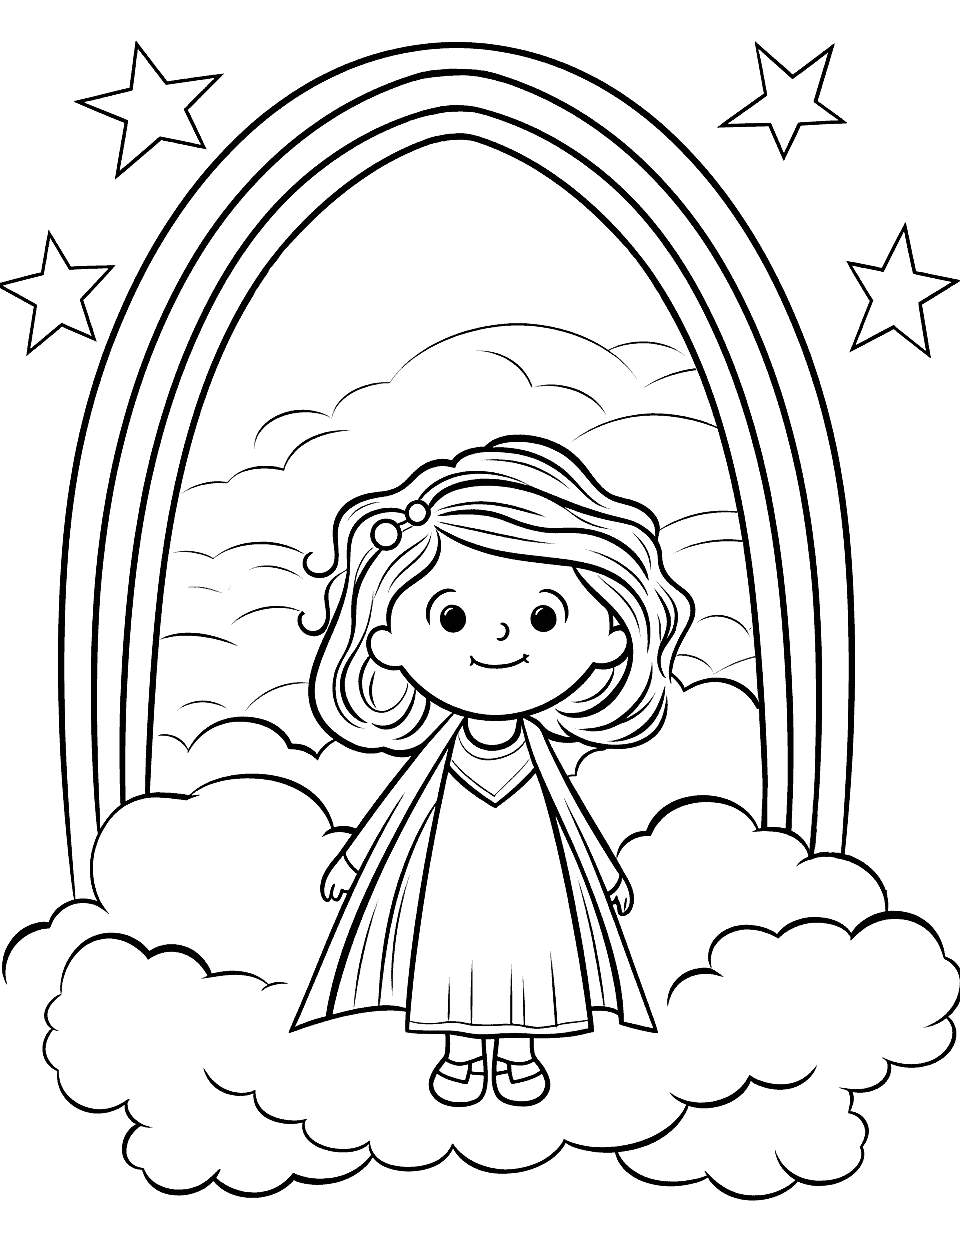 Rainbow Superhero Coloring Page - A superhero character with a rainbow-colored cape flying high in the sky.